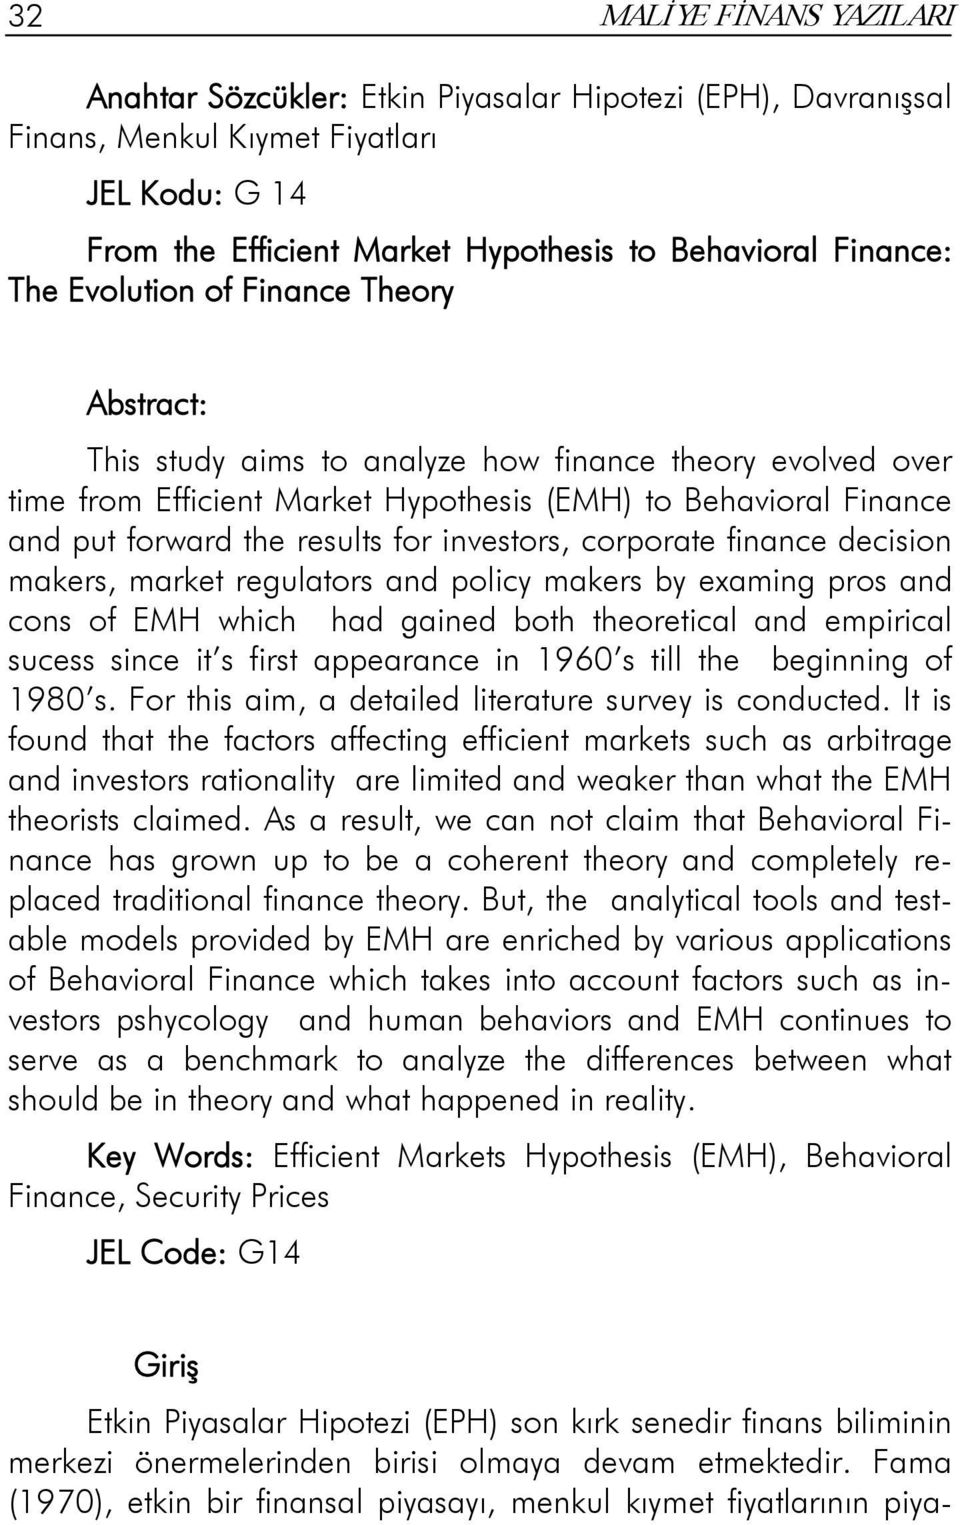 investors, corporate finance decision makers, market regulators and policy makers by examing pros and cons of EMH which had gained both theoretical and empirical sucess since it s first appearance in